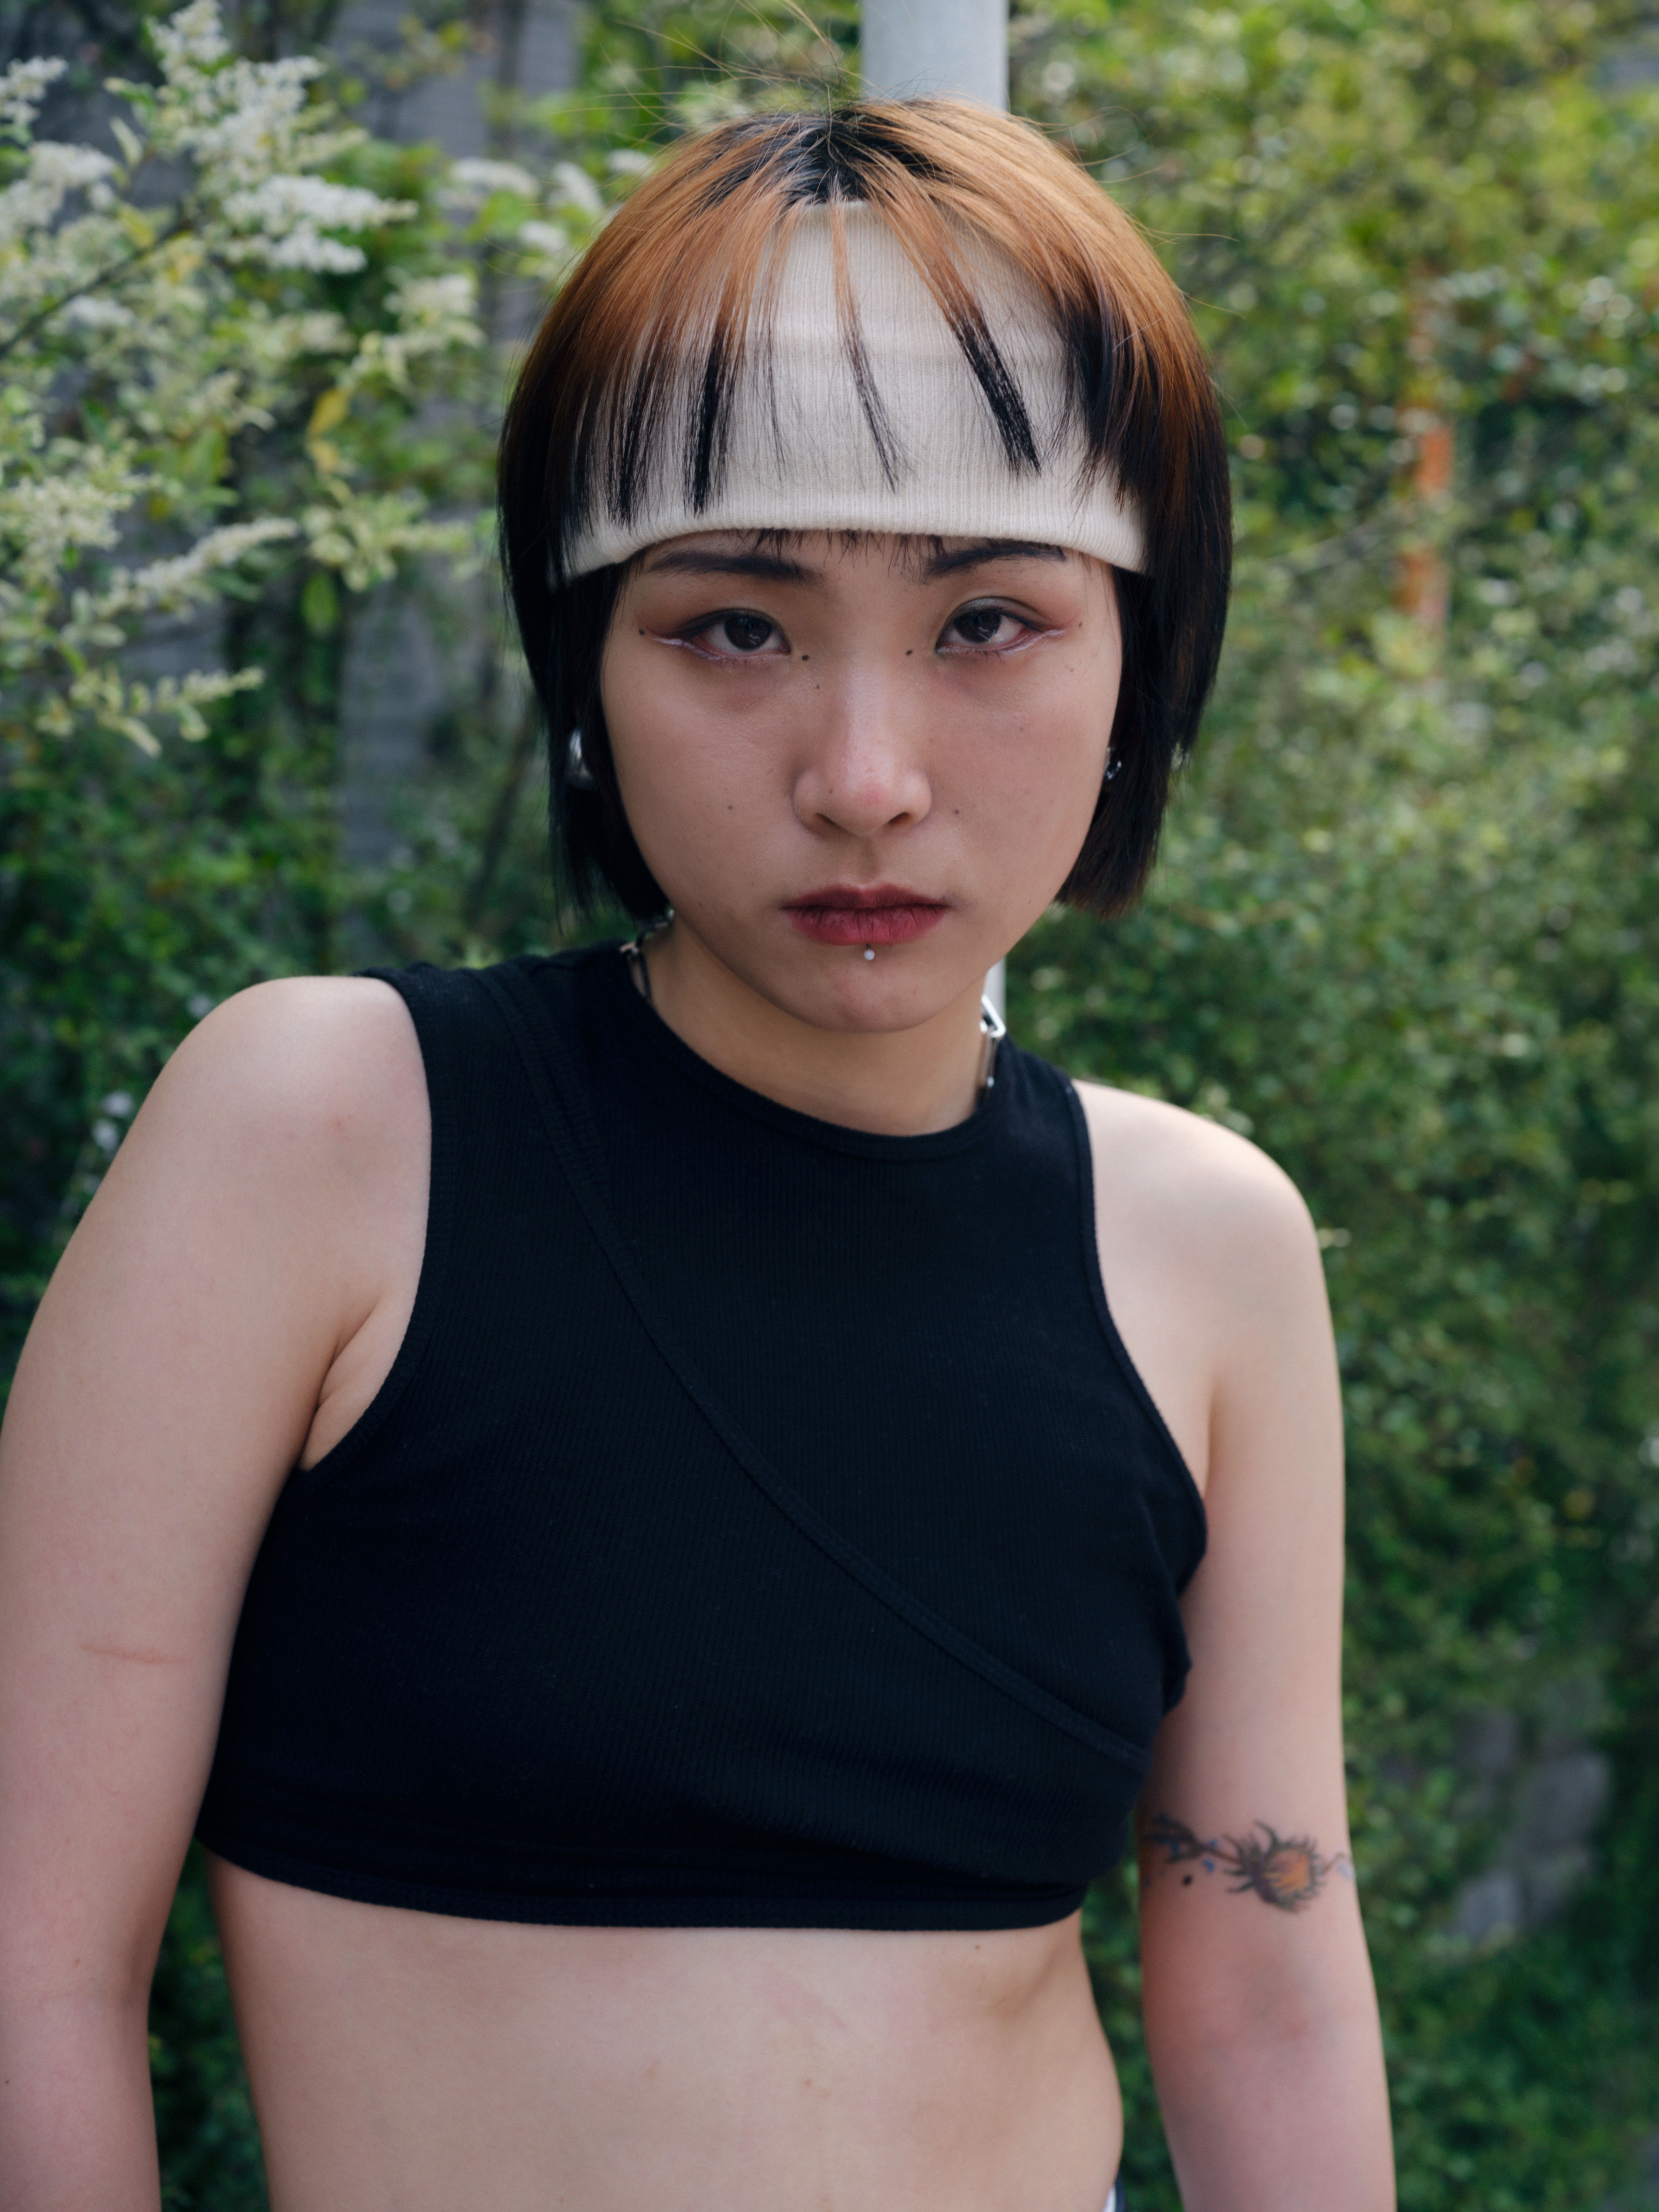 a person wearing a black cropped tank top with a white sweatband around their head, under dyed peach-coloured hair